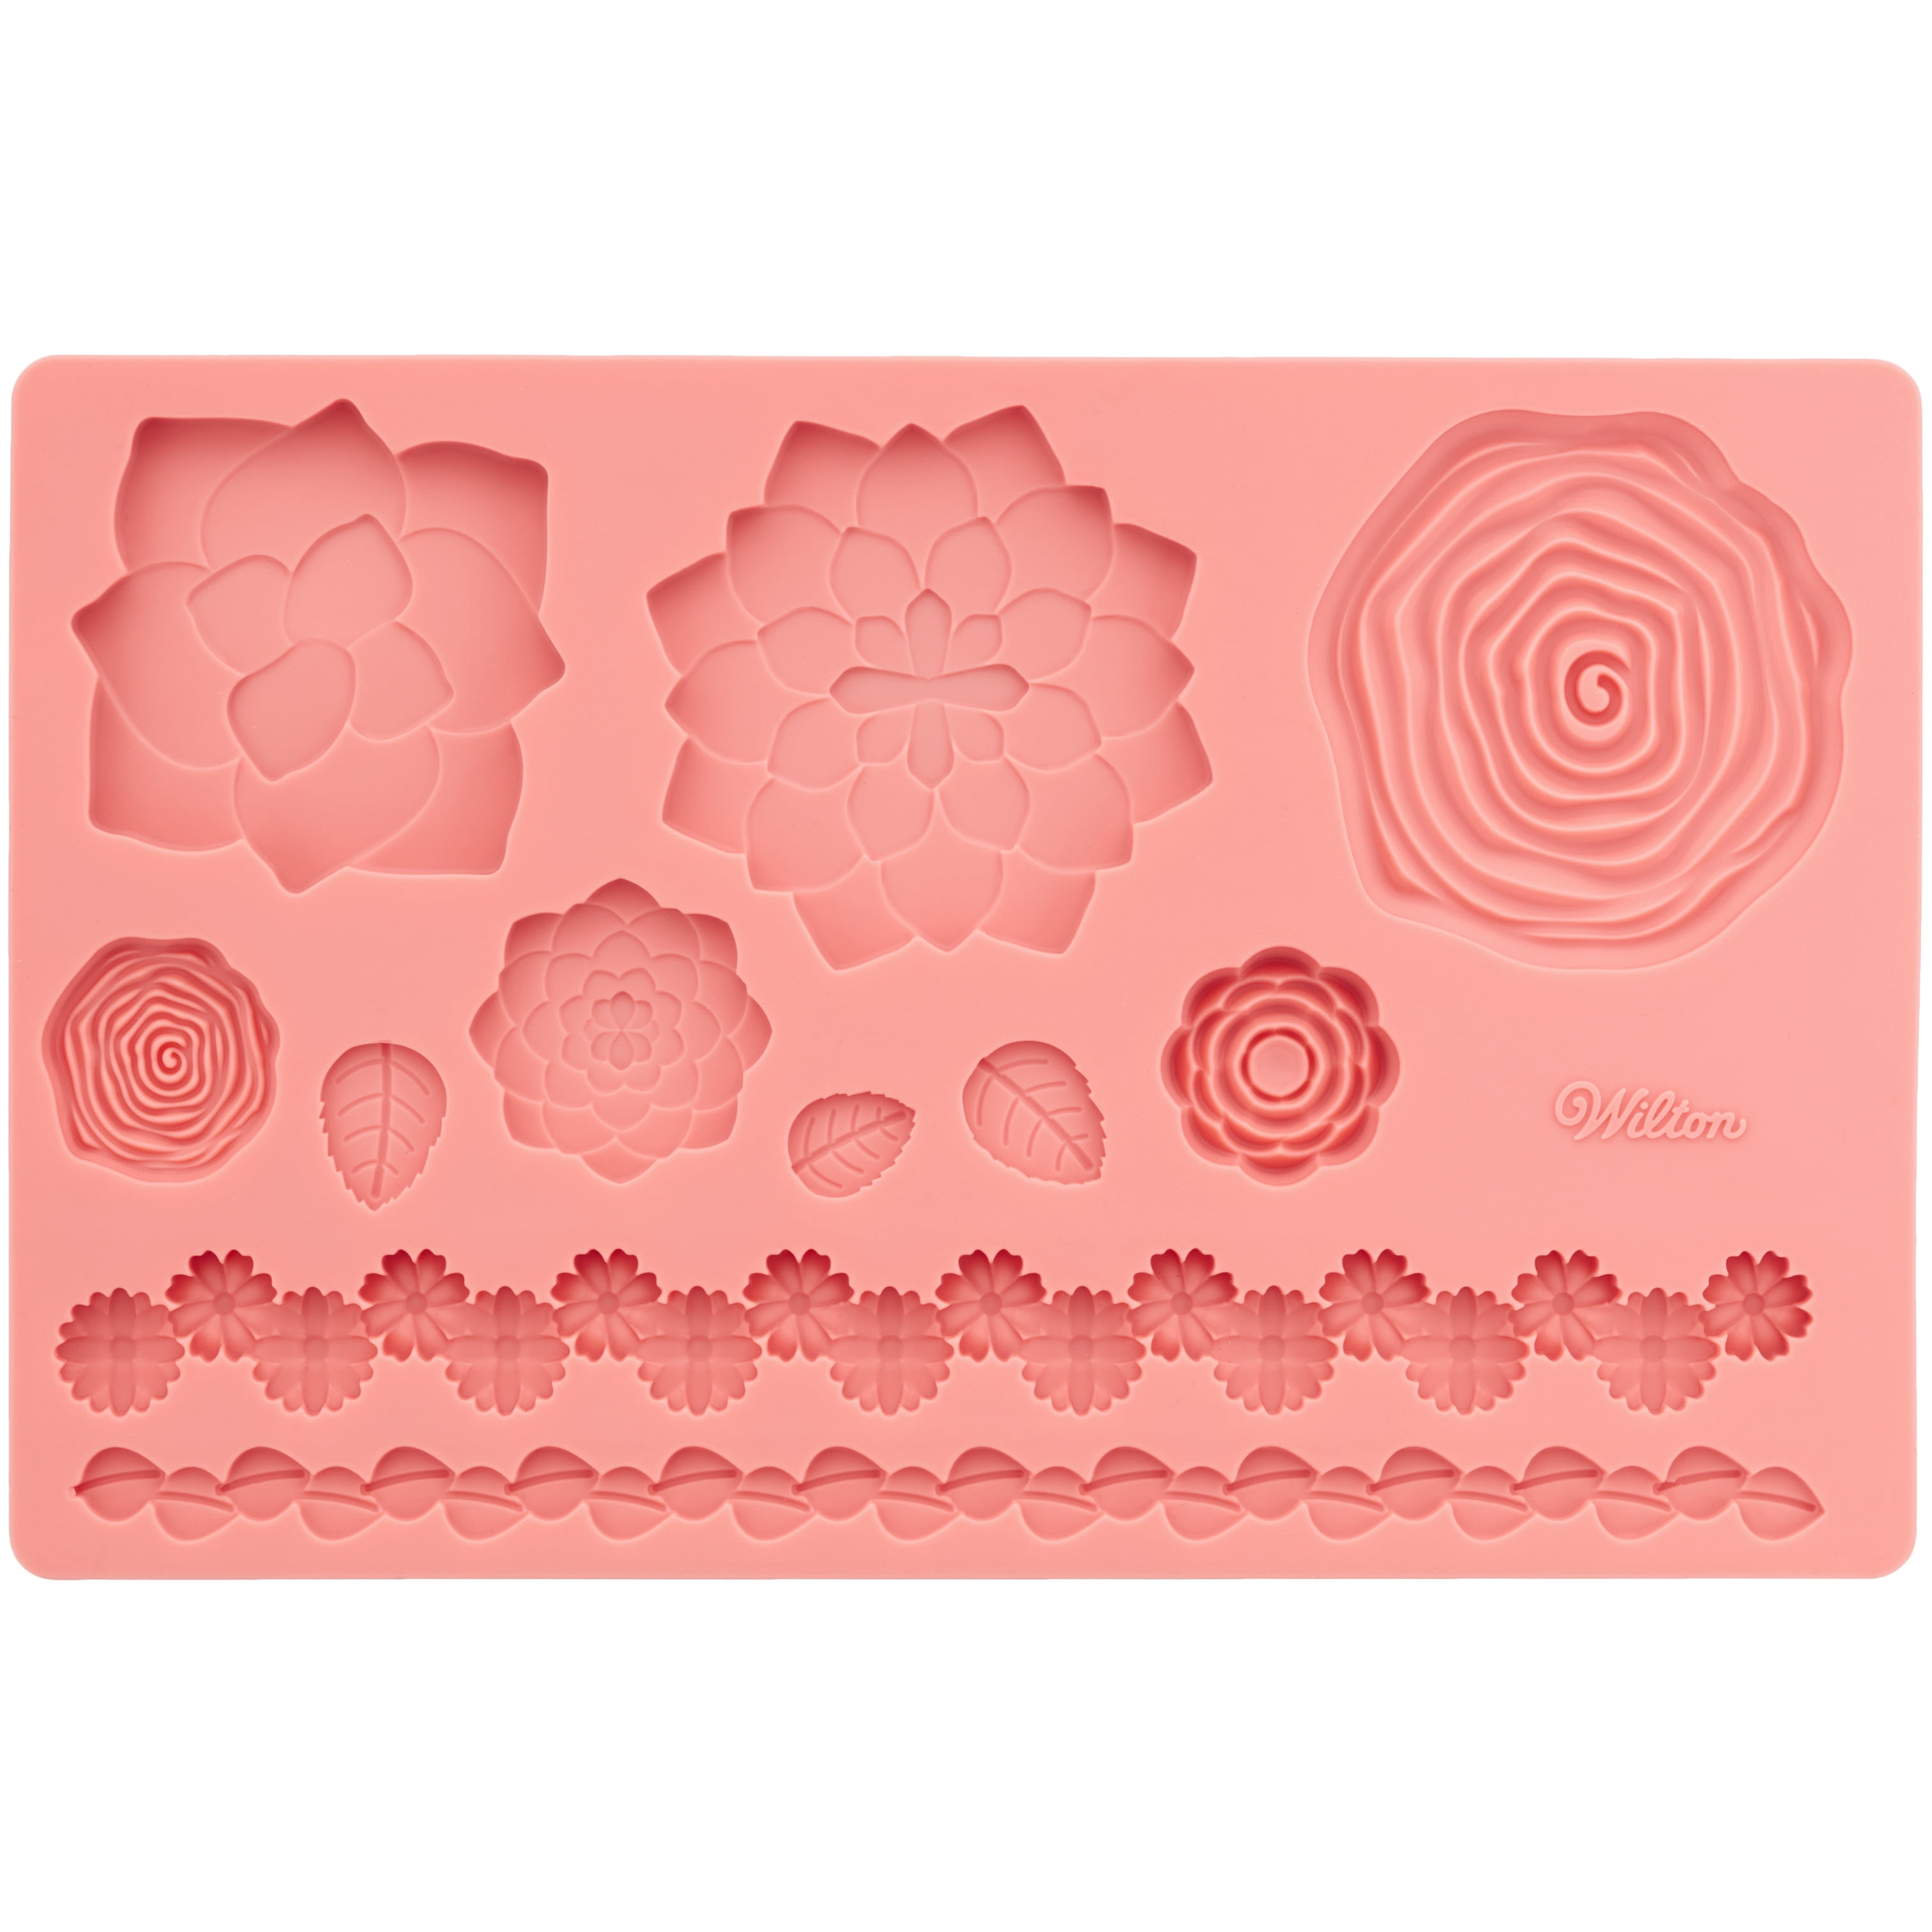 Wilton Floral Party Silicone Mold, 6-Cavity